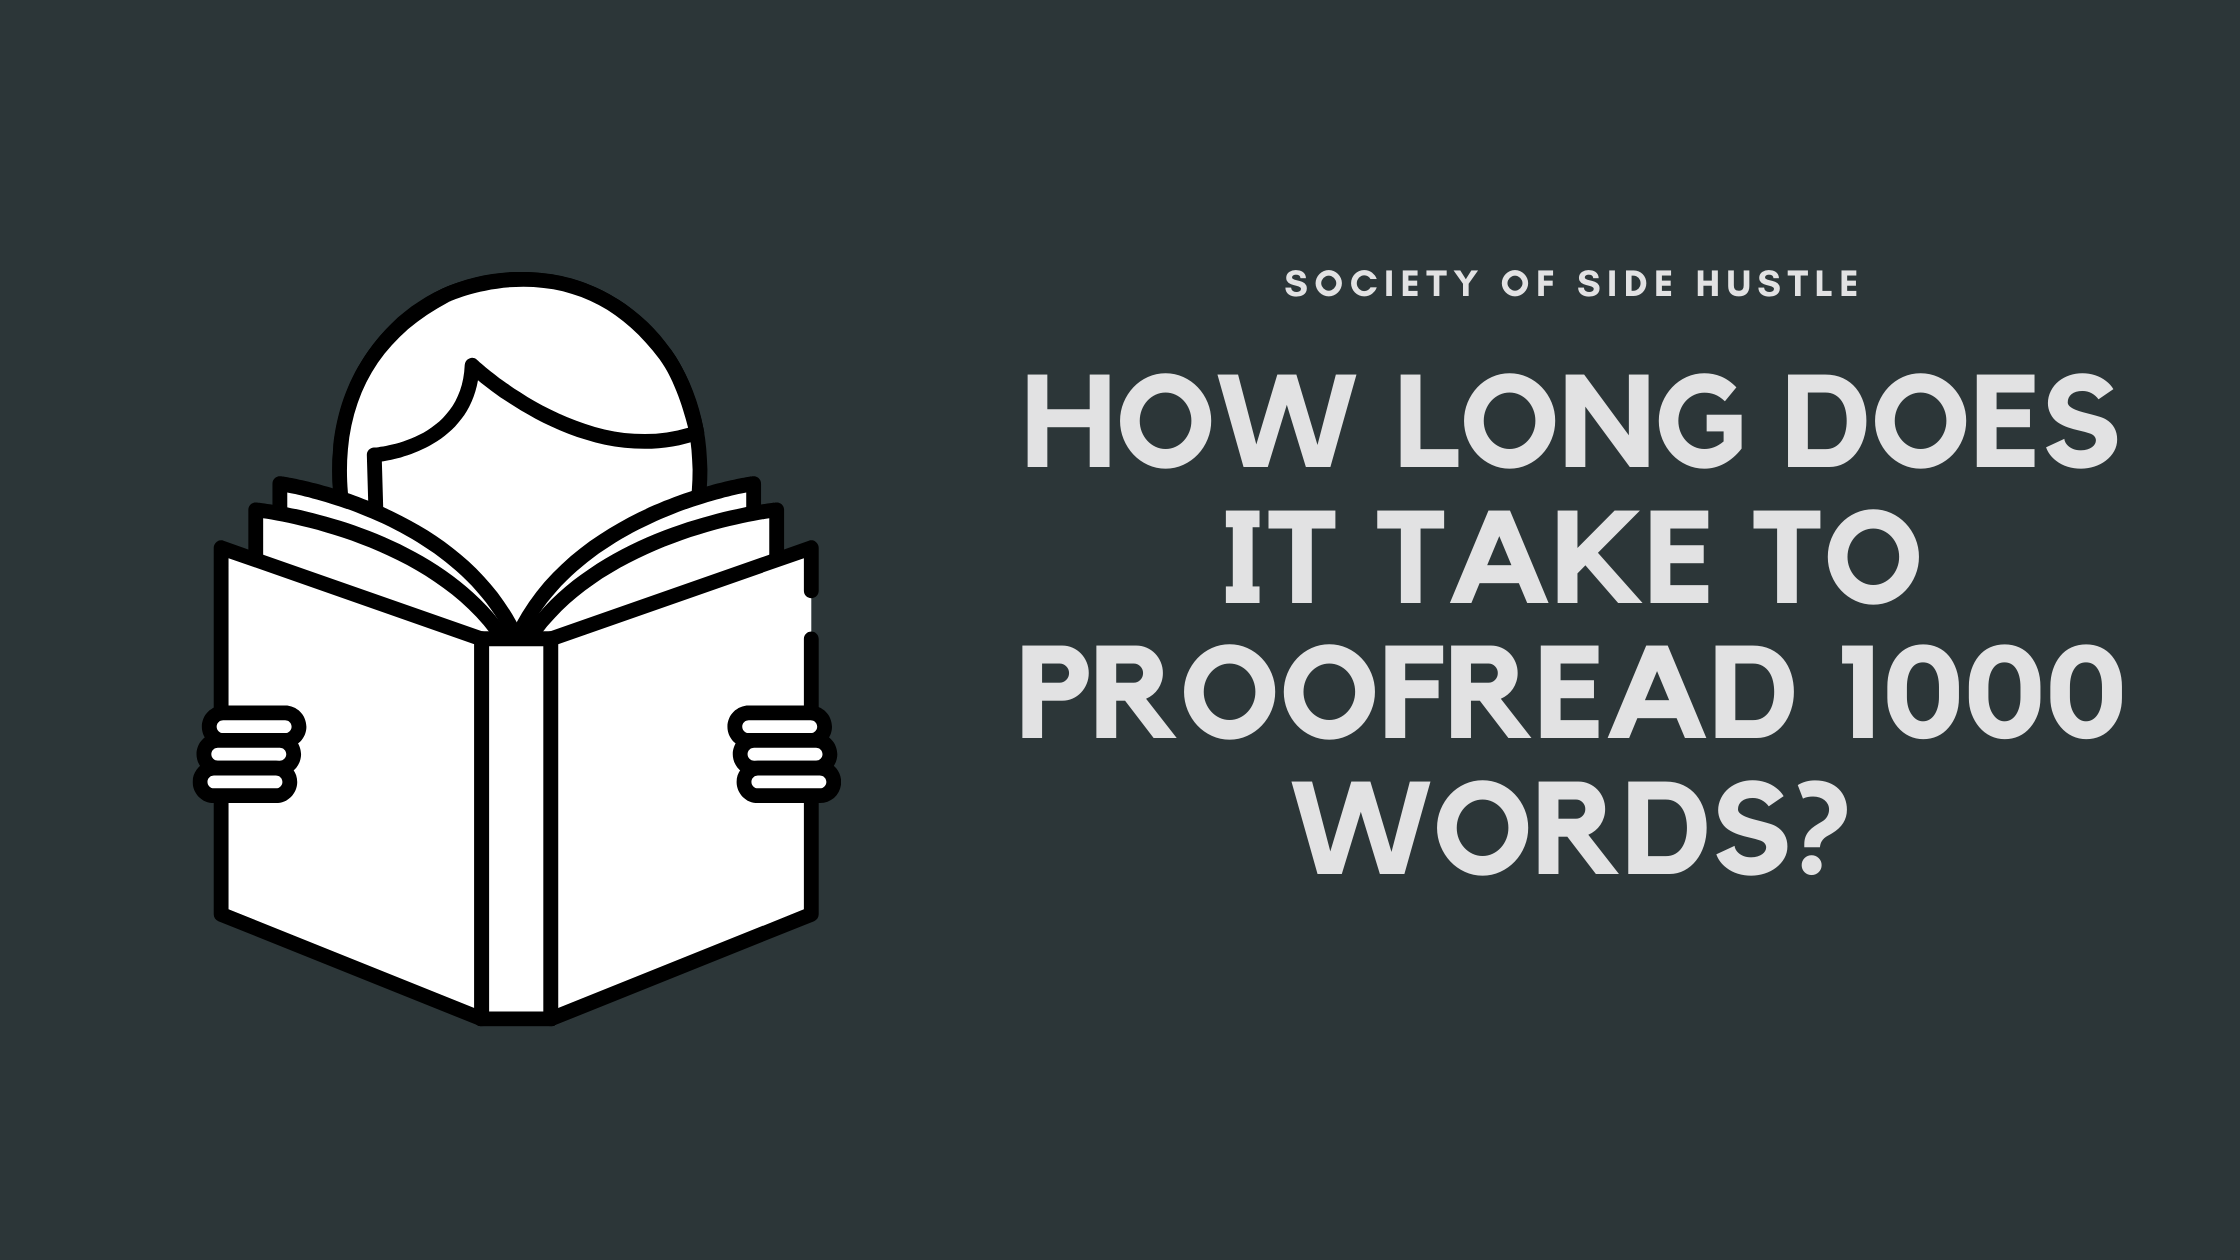 How Long Does it Take To Proofread 1000 Words?